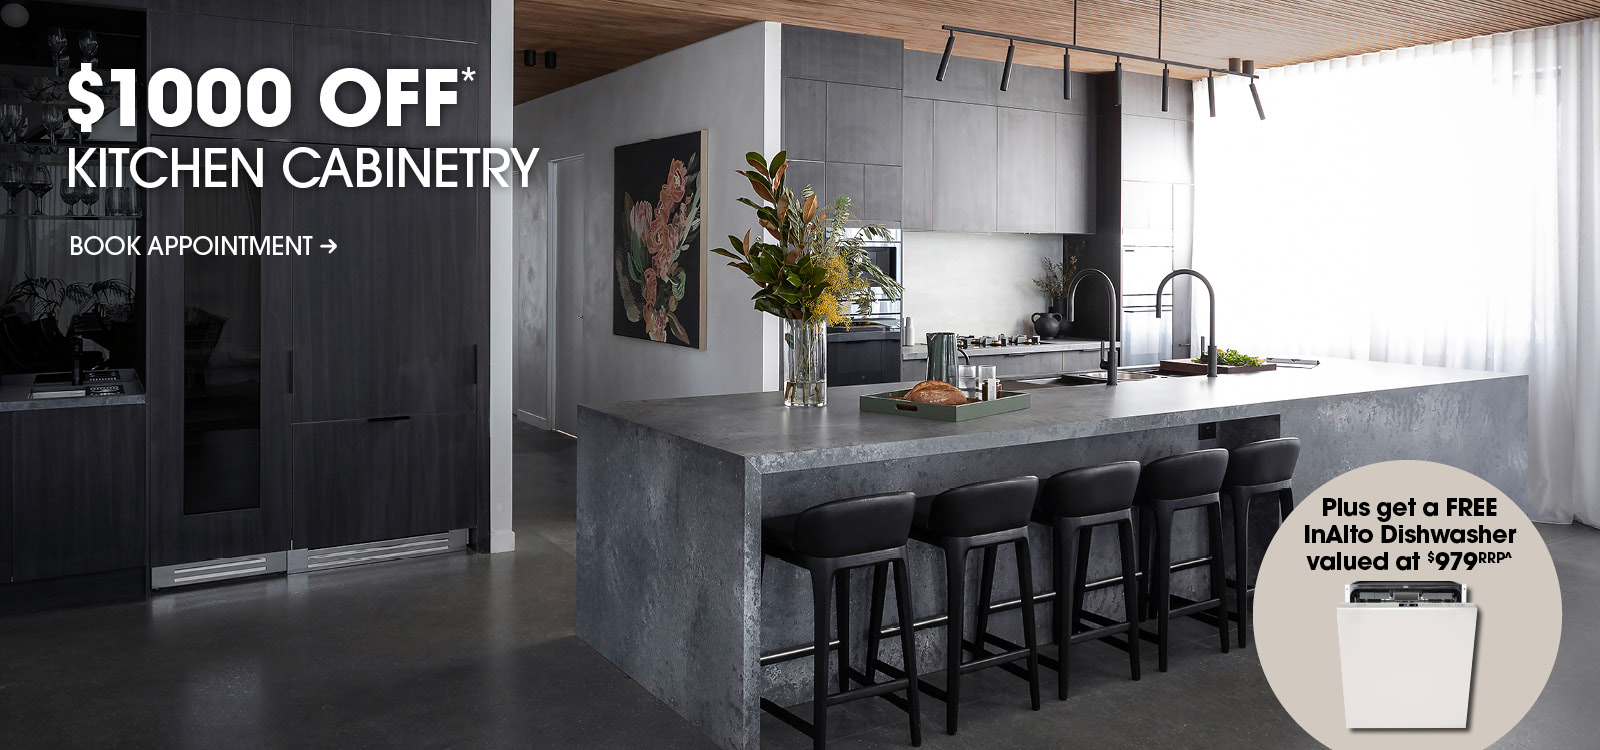 Freedom Kitchens - $1000 Off Cabinetry + Receive a Free Dishwasher